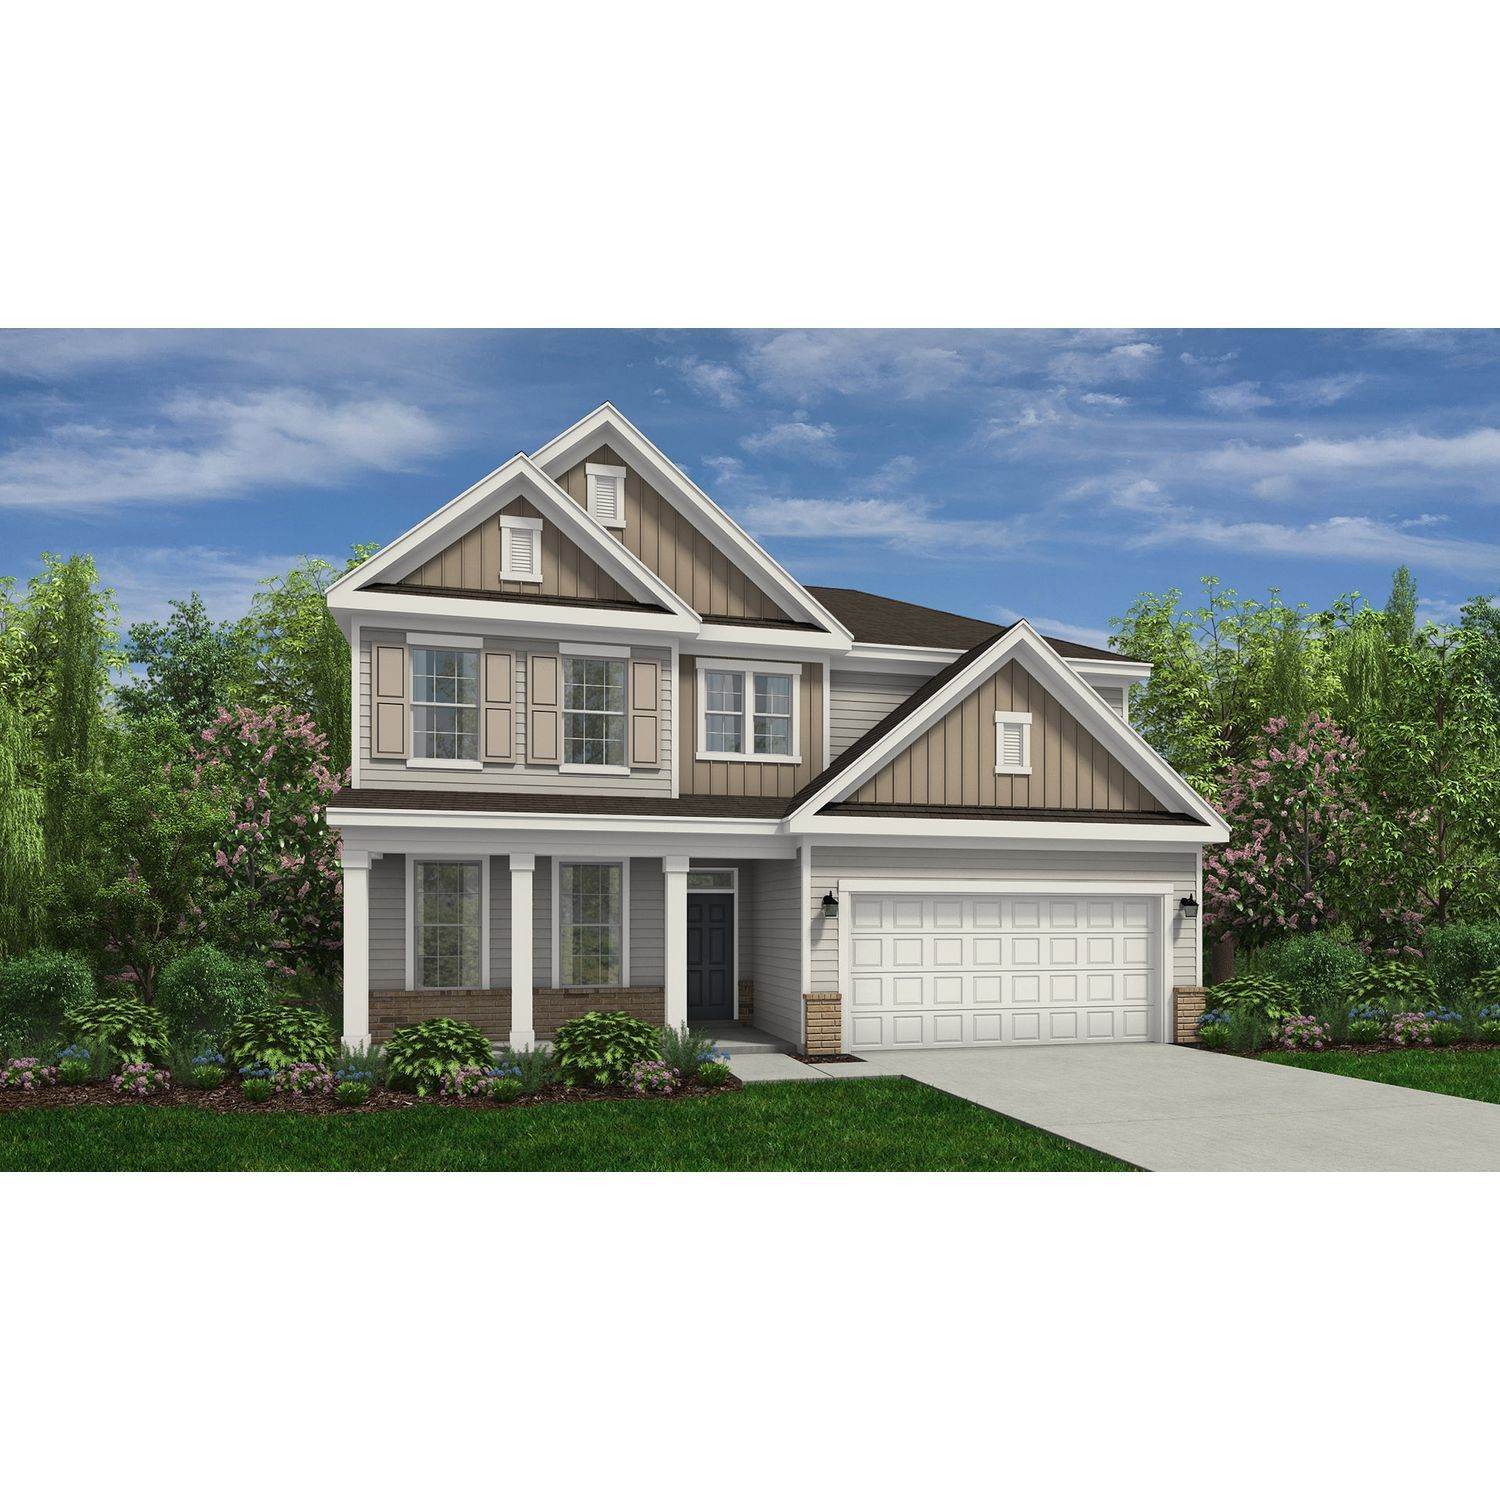 Single Family for Sale at Preserve At Lake Upchurch 4410 Saleeby Way, Fayetteville, NC 28306